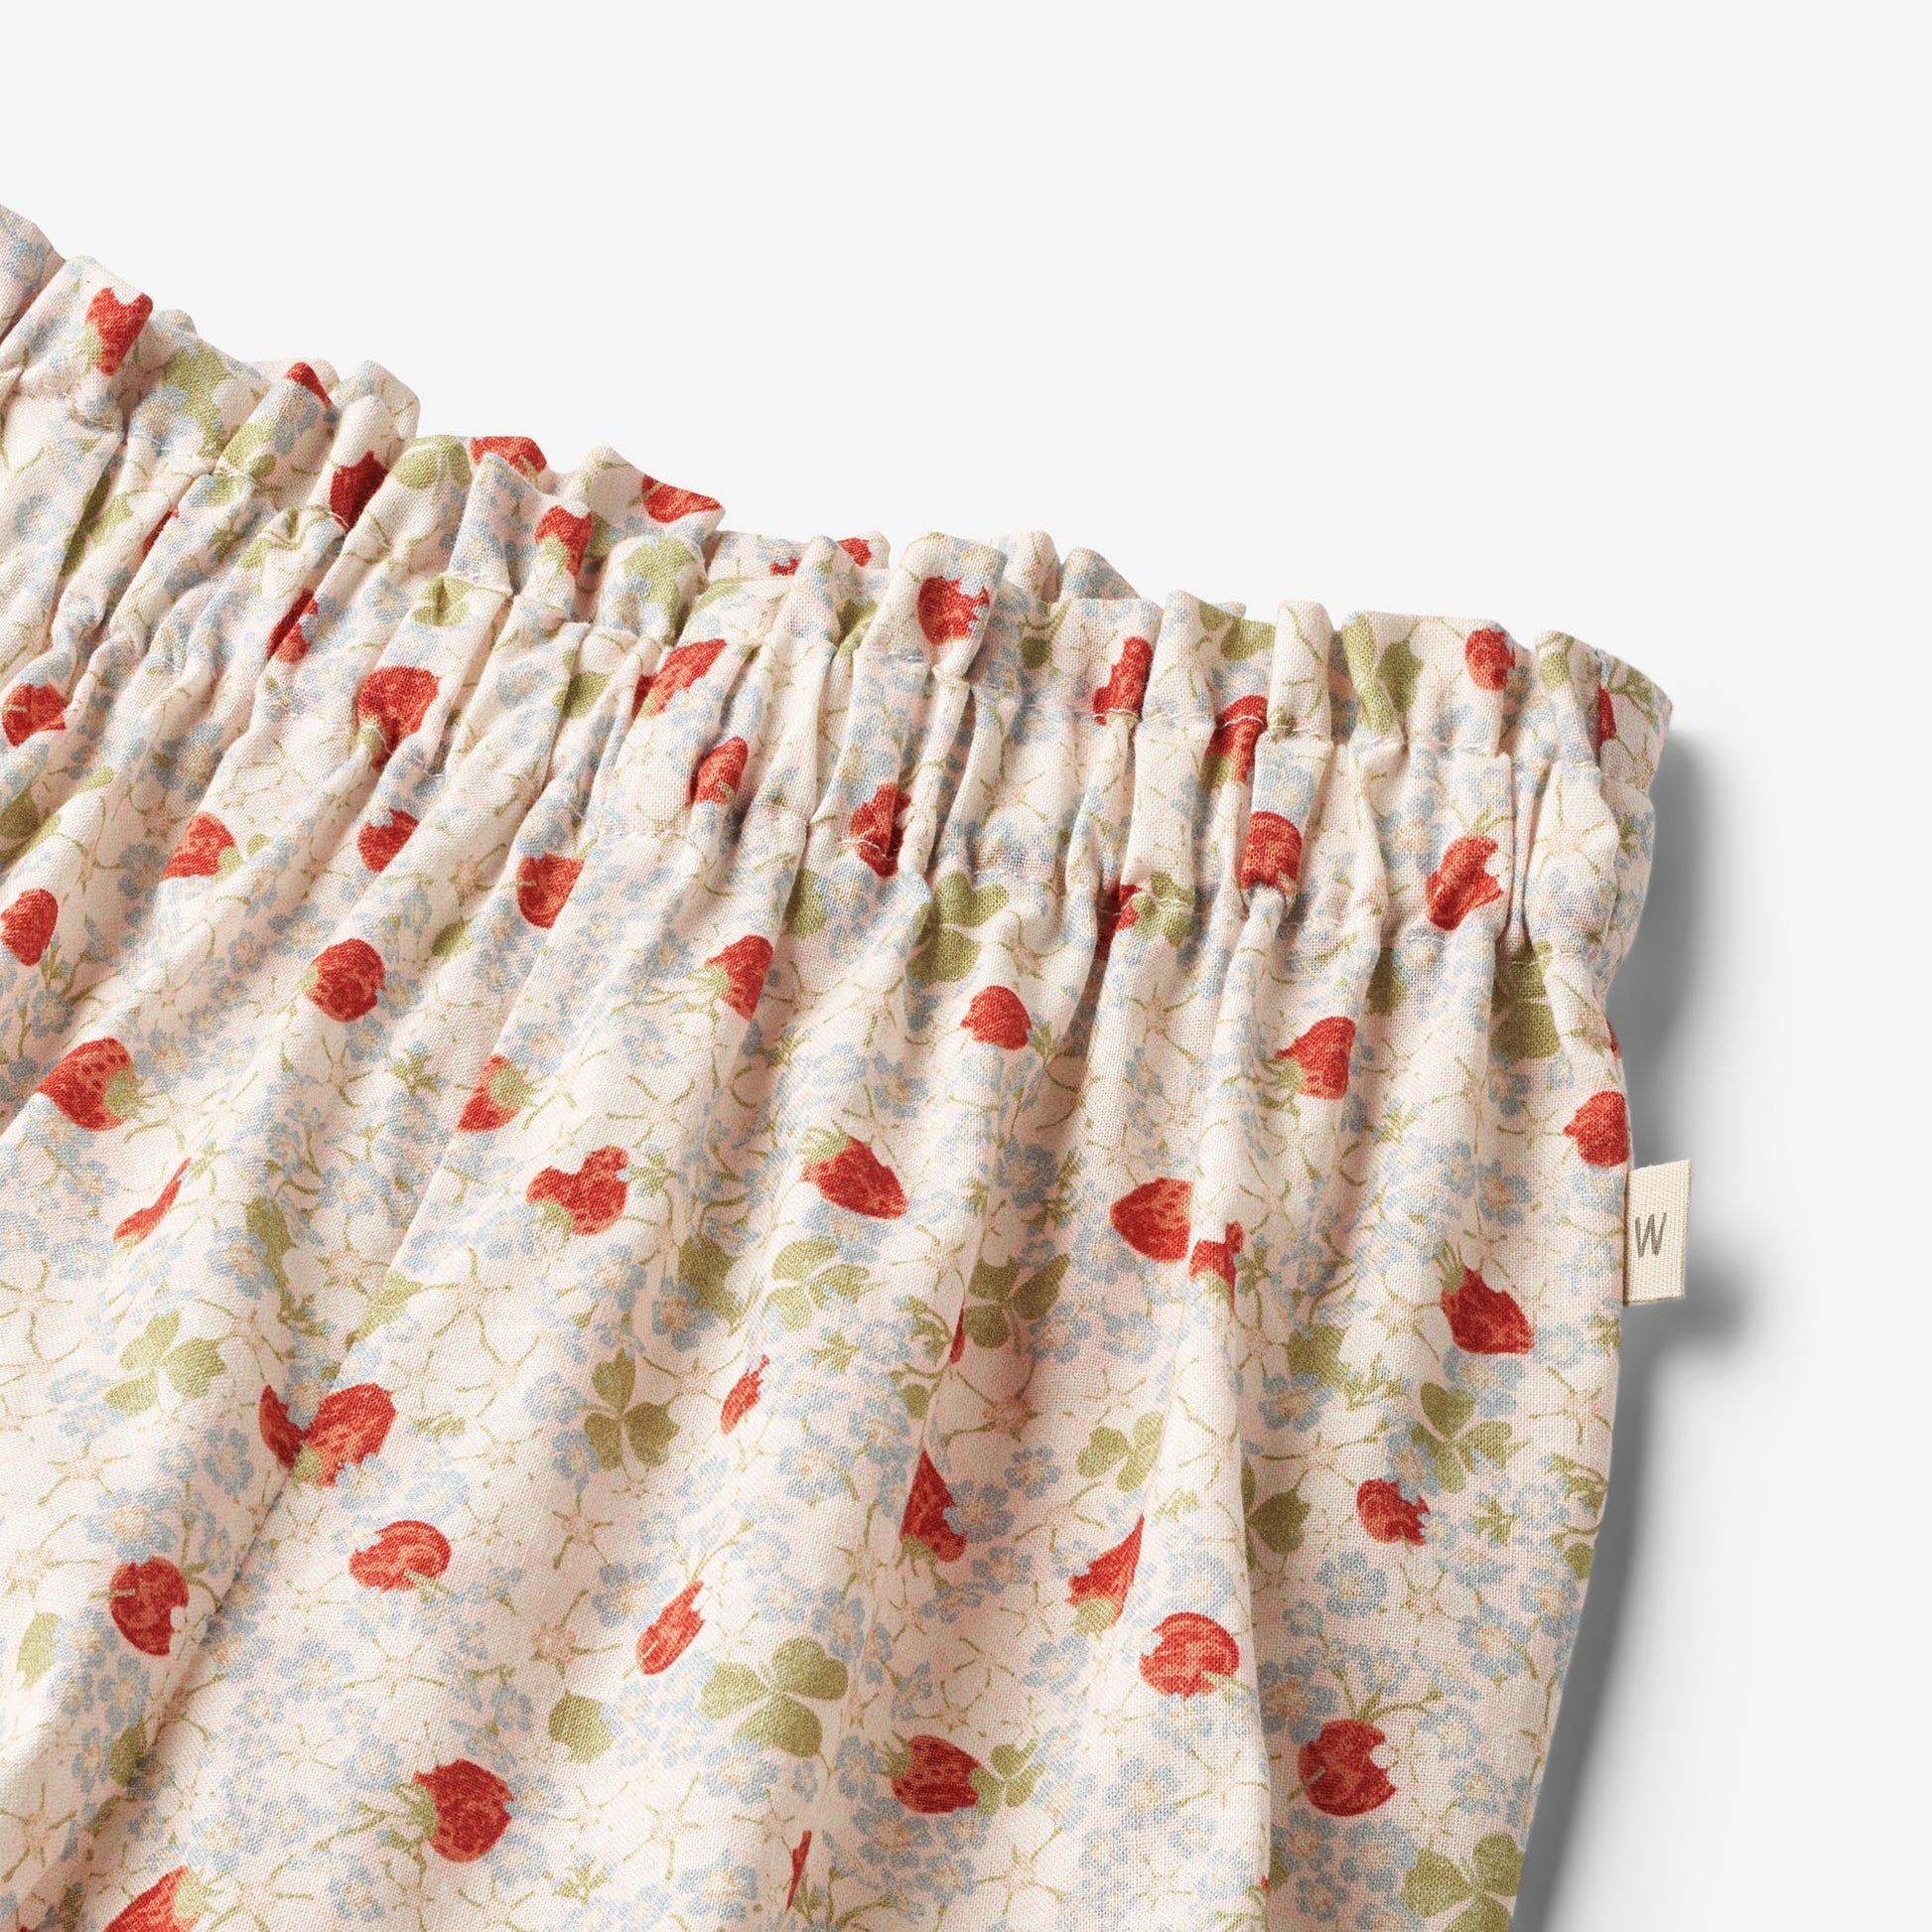 Wheat 'Polly' Baby Trousers - Rose Strawberries